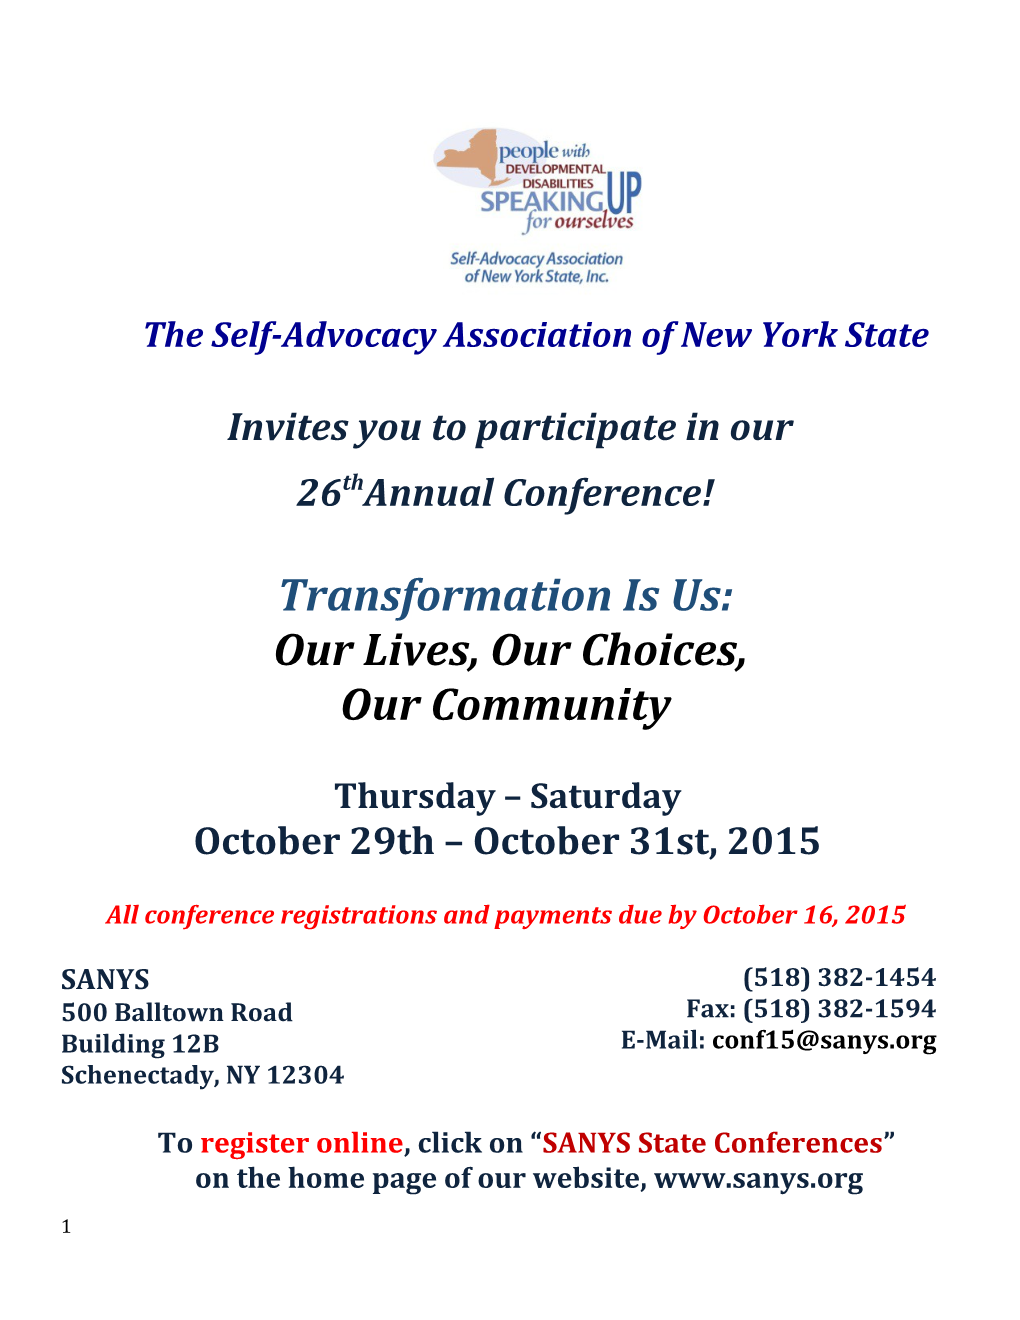 The Self-Advocacy Association of New York State